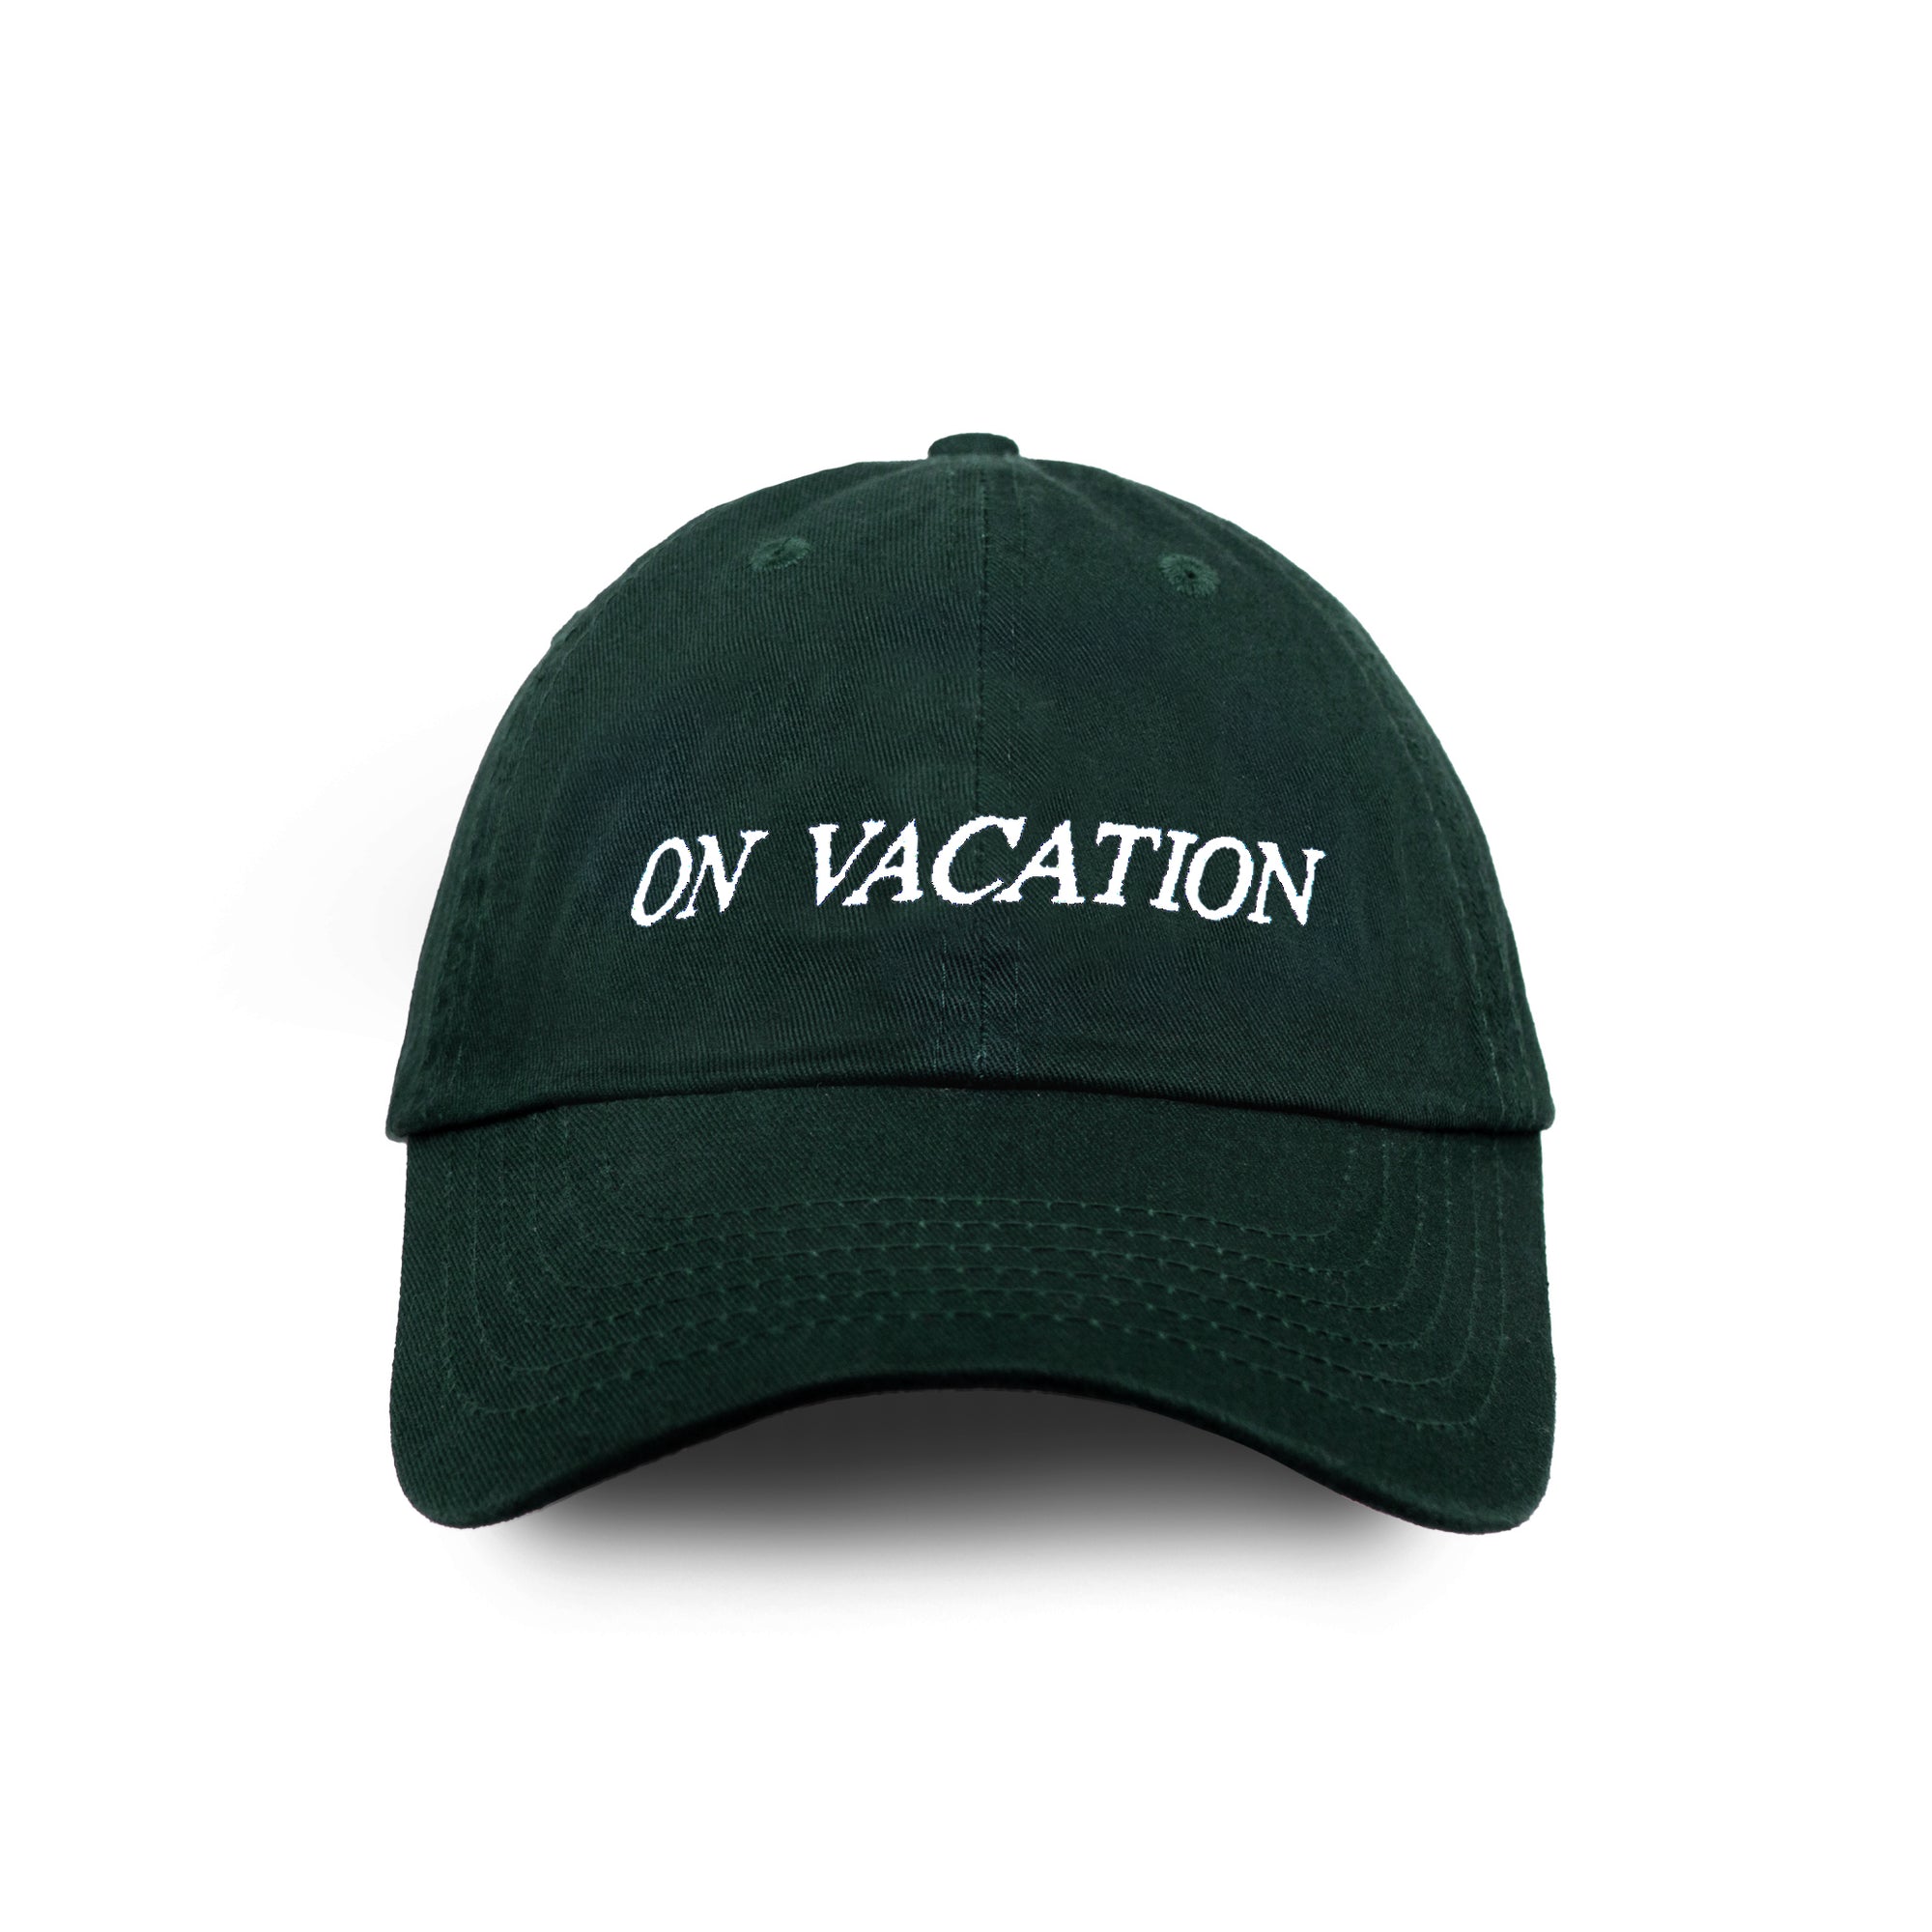 ON VACATION